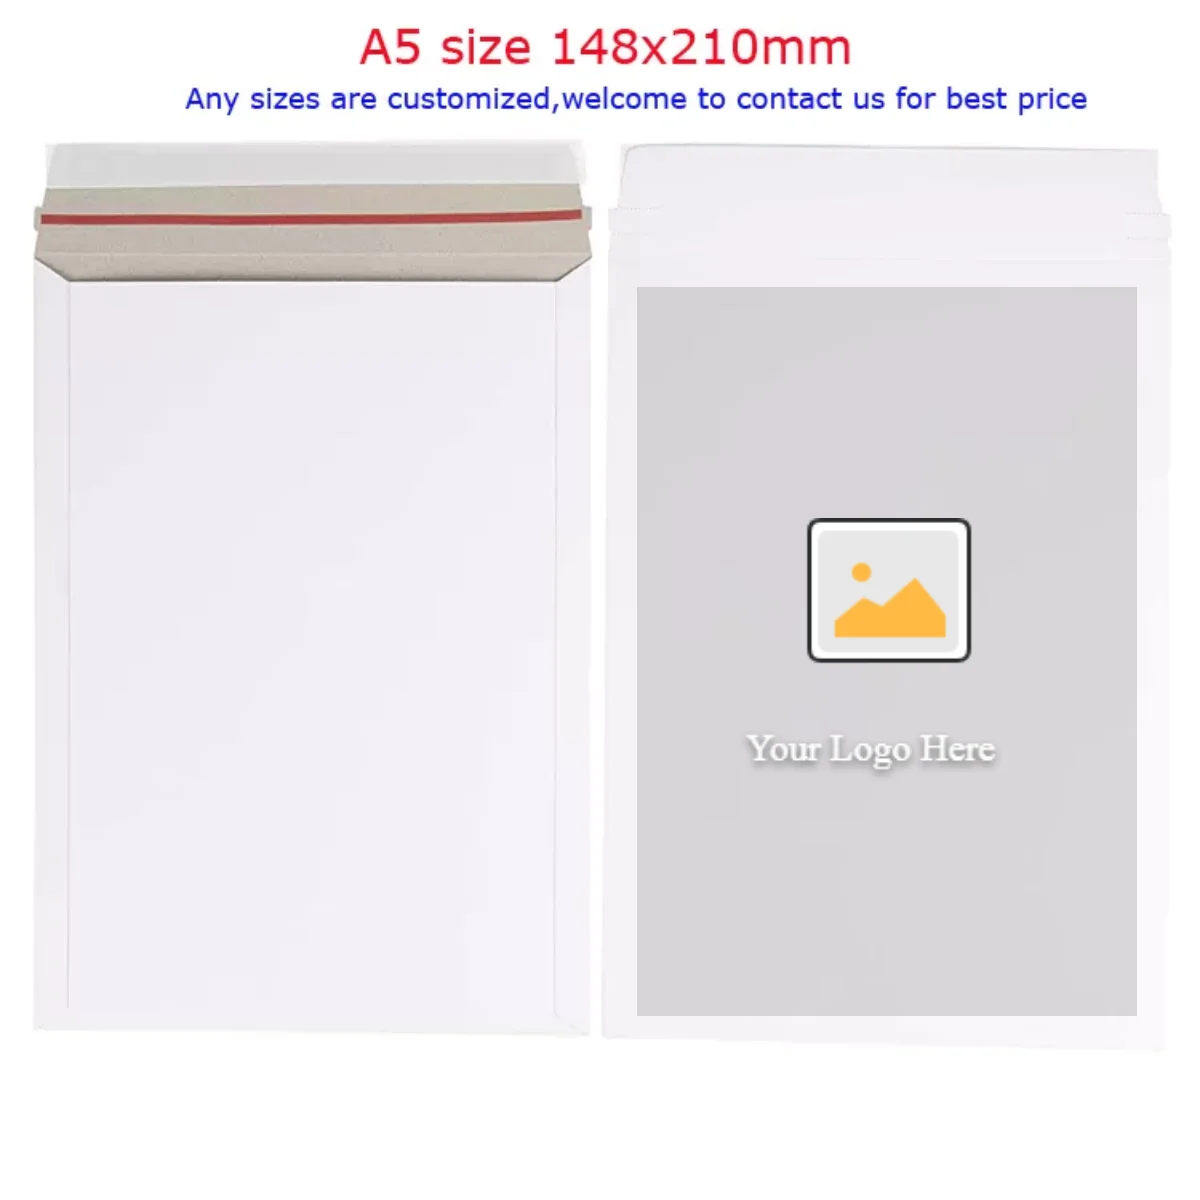 Peel seal & open. A4 White All Board card mailer envelope to fit A4 paper C4